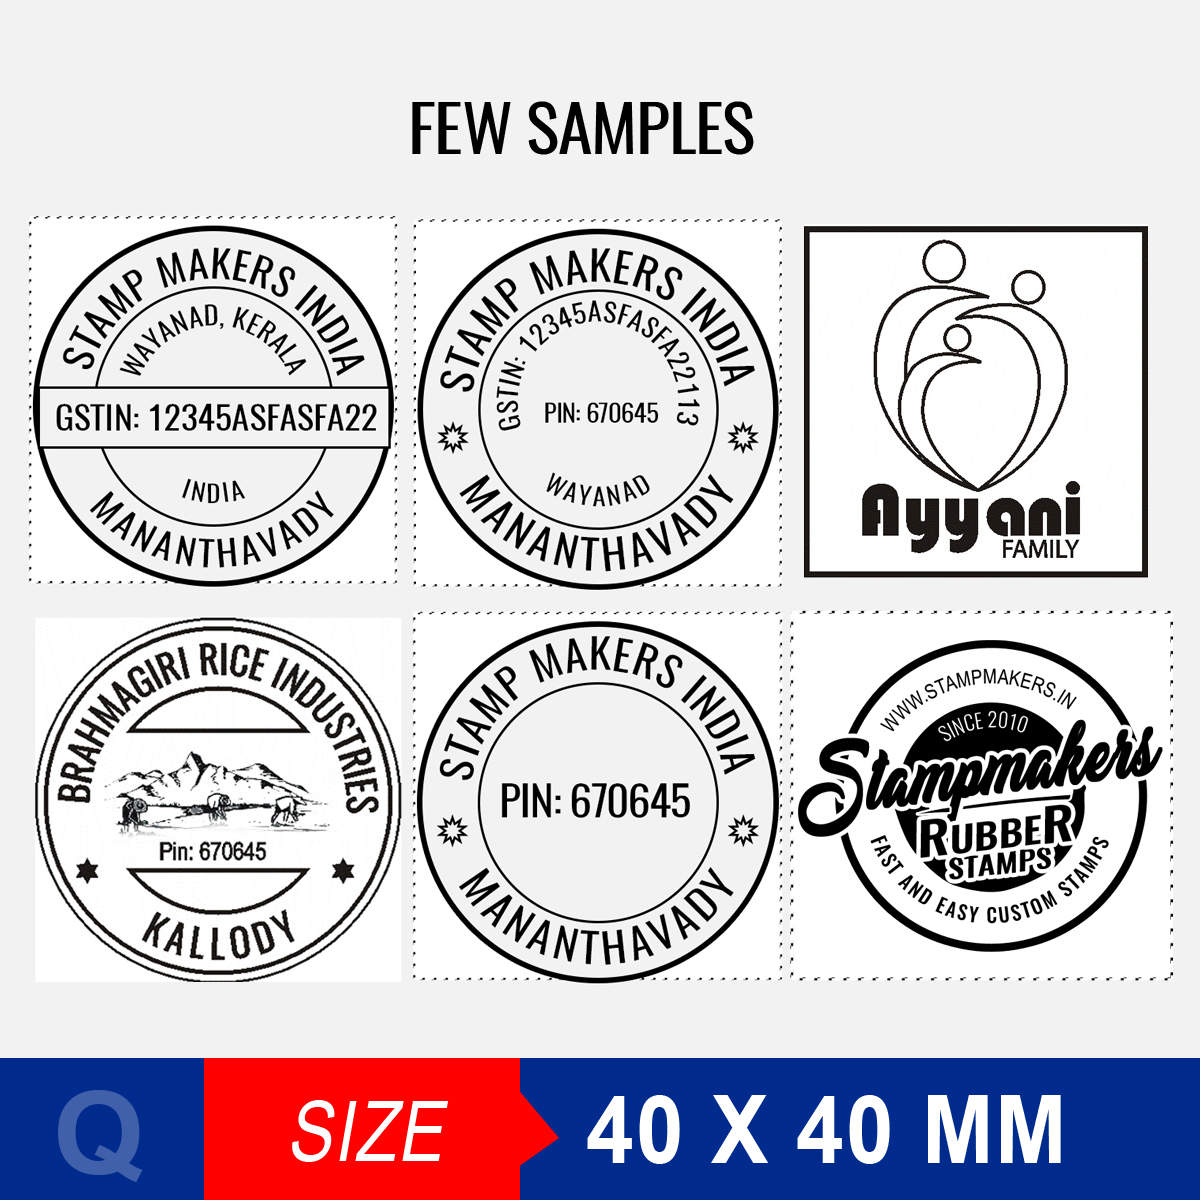 online company seal maker free